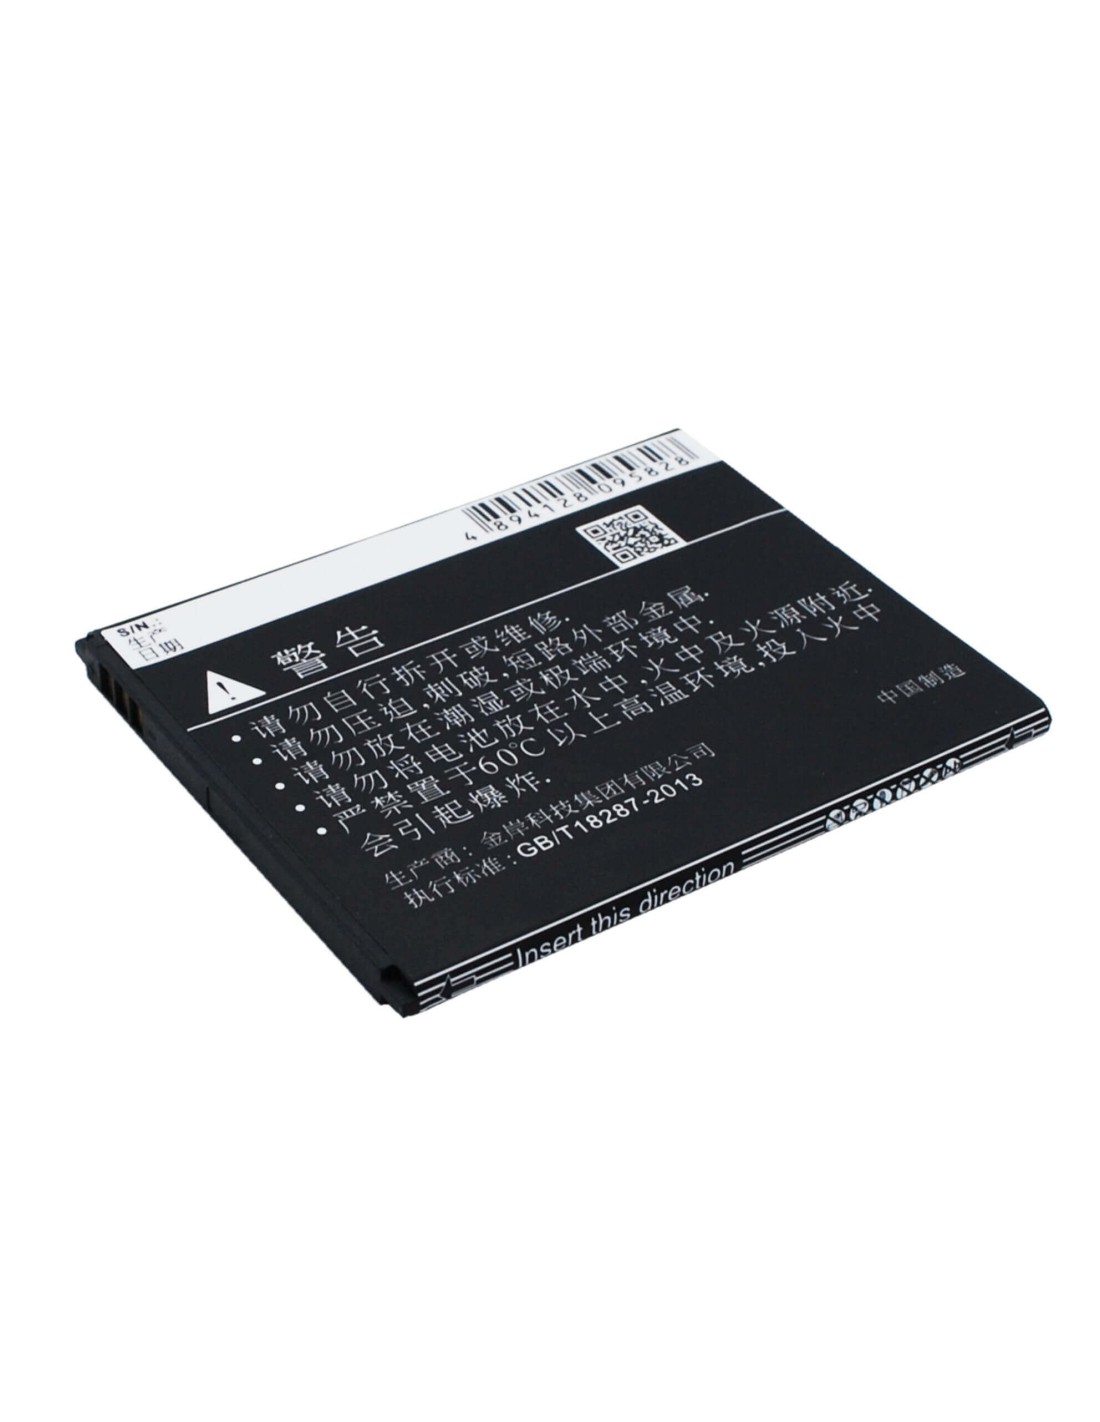 Battery for Coolpad 7251, 5311 3.7V, 1650mAh - 6.11Wh